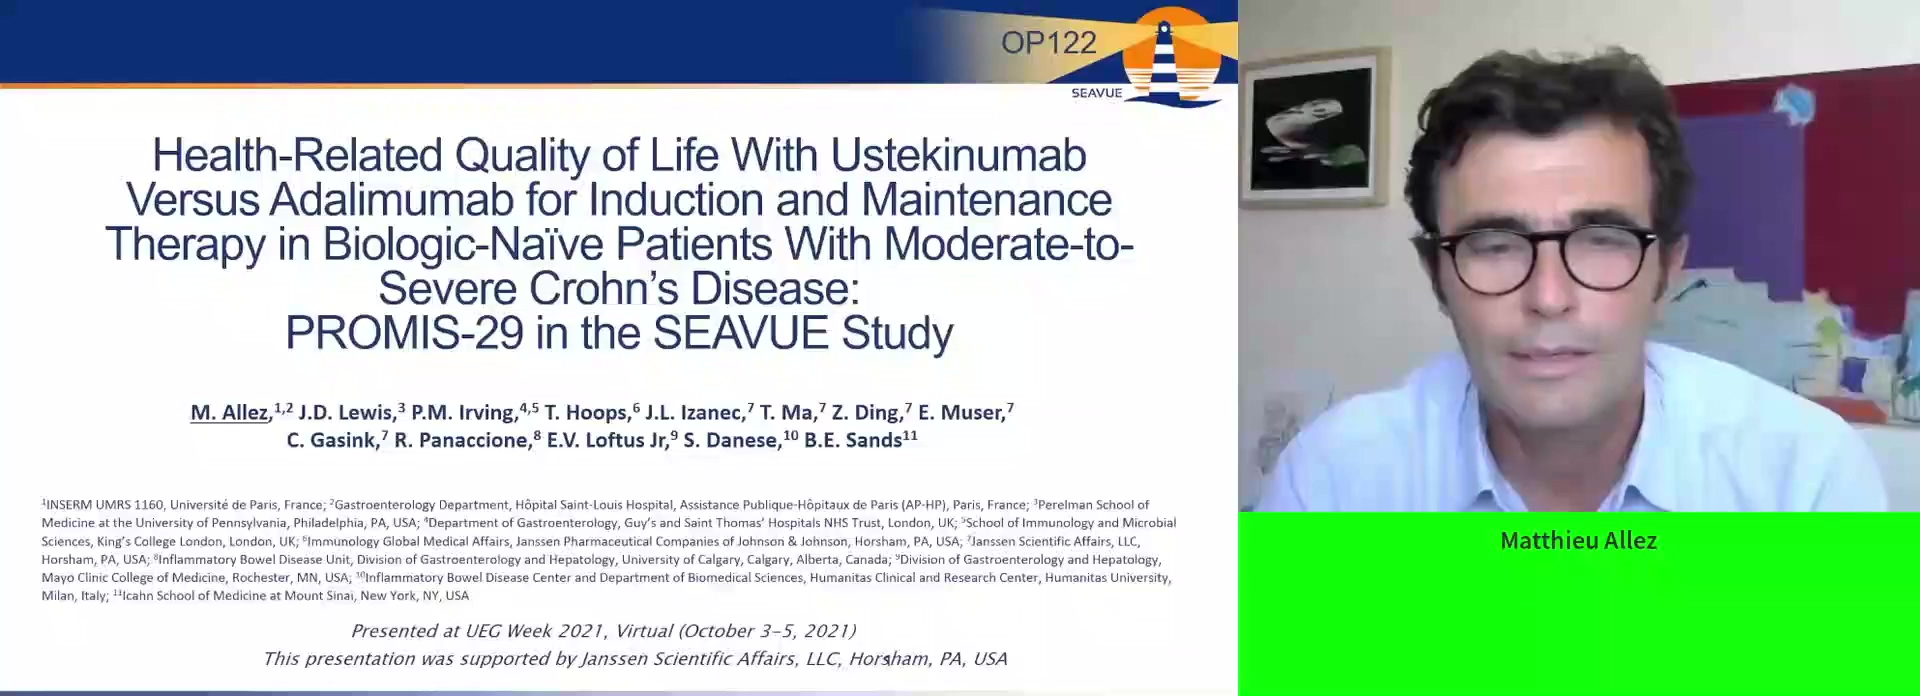 HEALTH-RELATED QUALITY OF LIFE WITH USTEKINUMAB VERSUS ADALIMUMAB FOR INDUCTION AND MAINTENANCE THERAPY IN BIOLOGIC-NAÏVE PATIENTS WITH MODERATE-TO-SEVERE CROHN'S DISEASE: PROMIS-29 IN THE SEAVUE STUDY